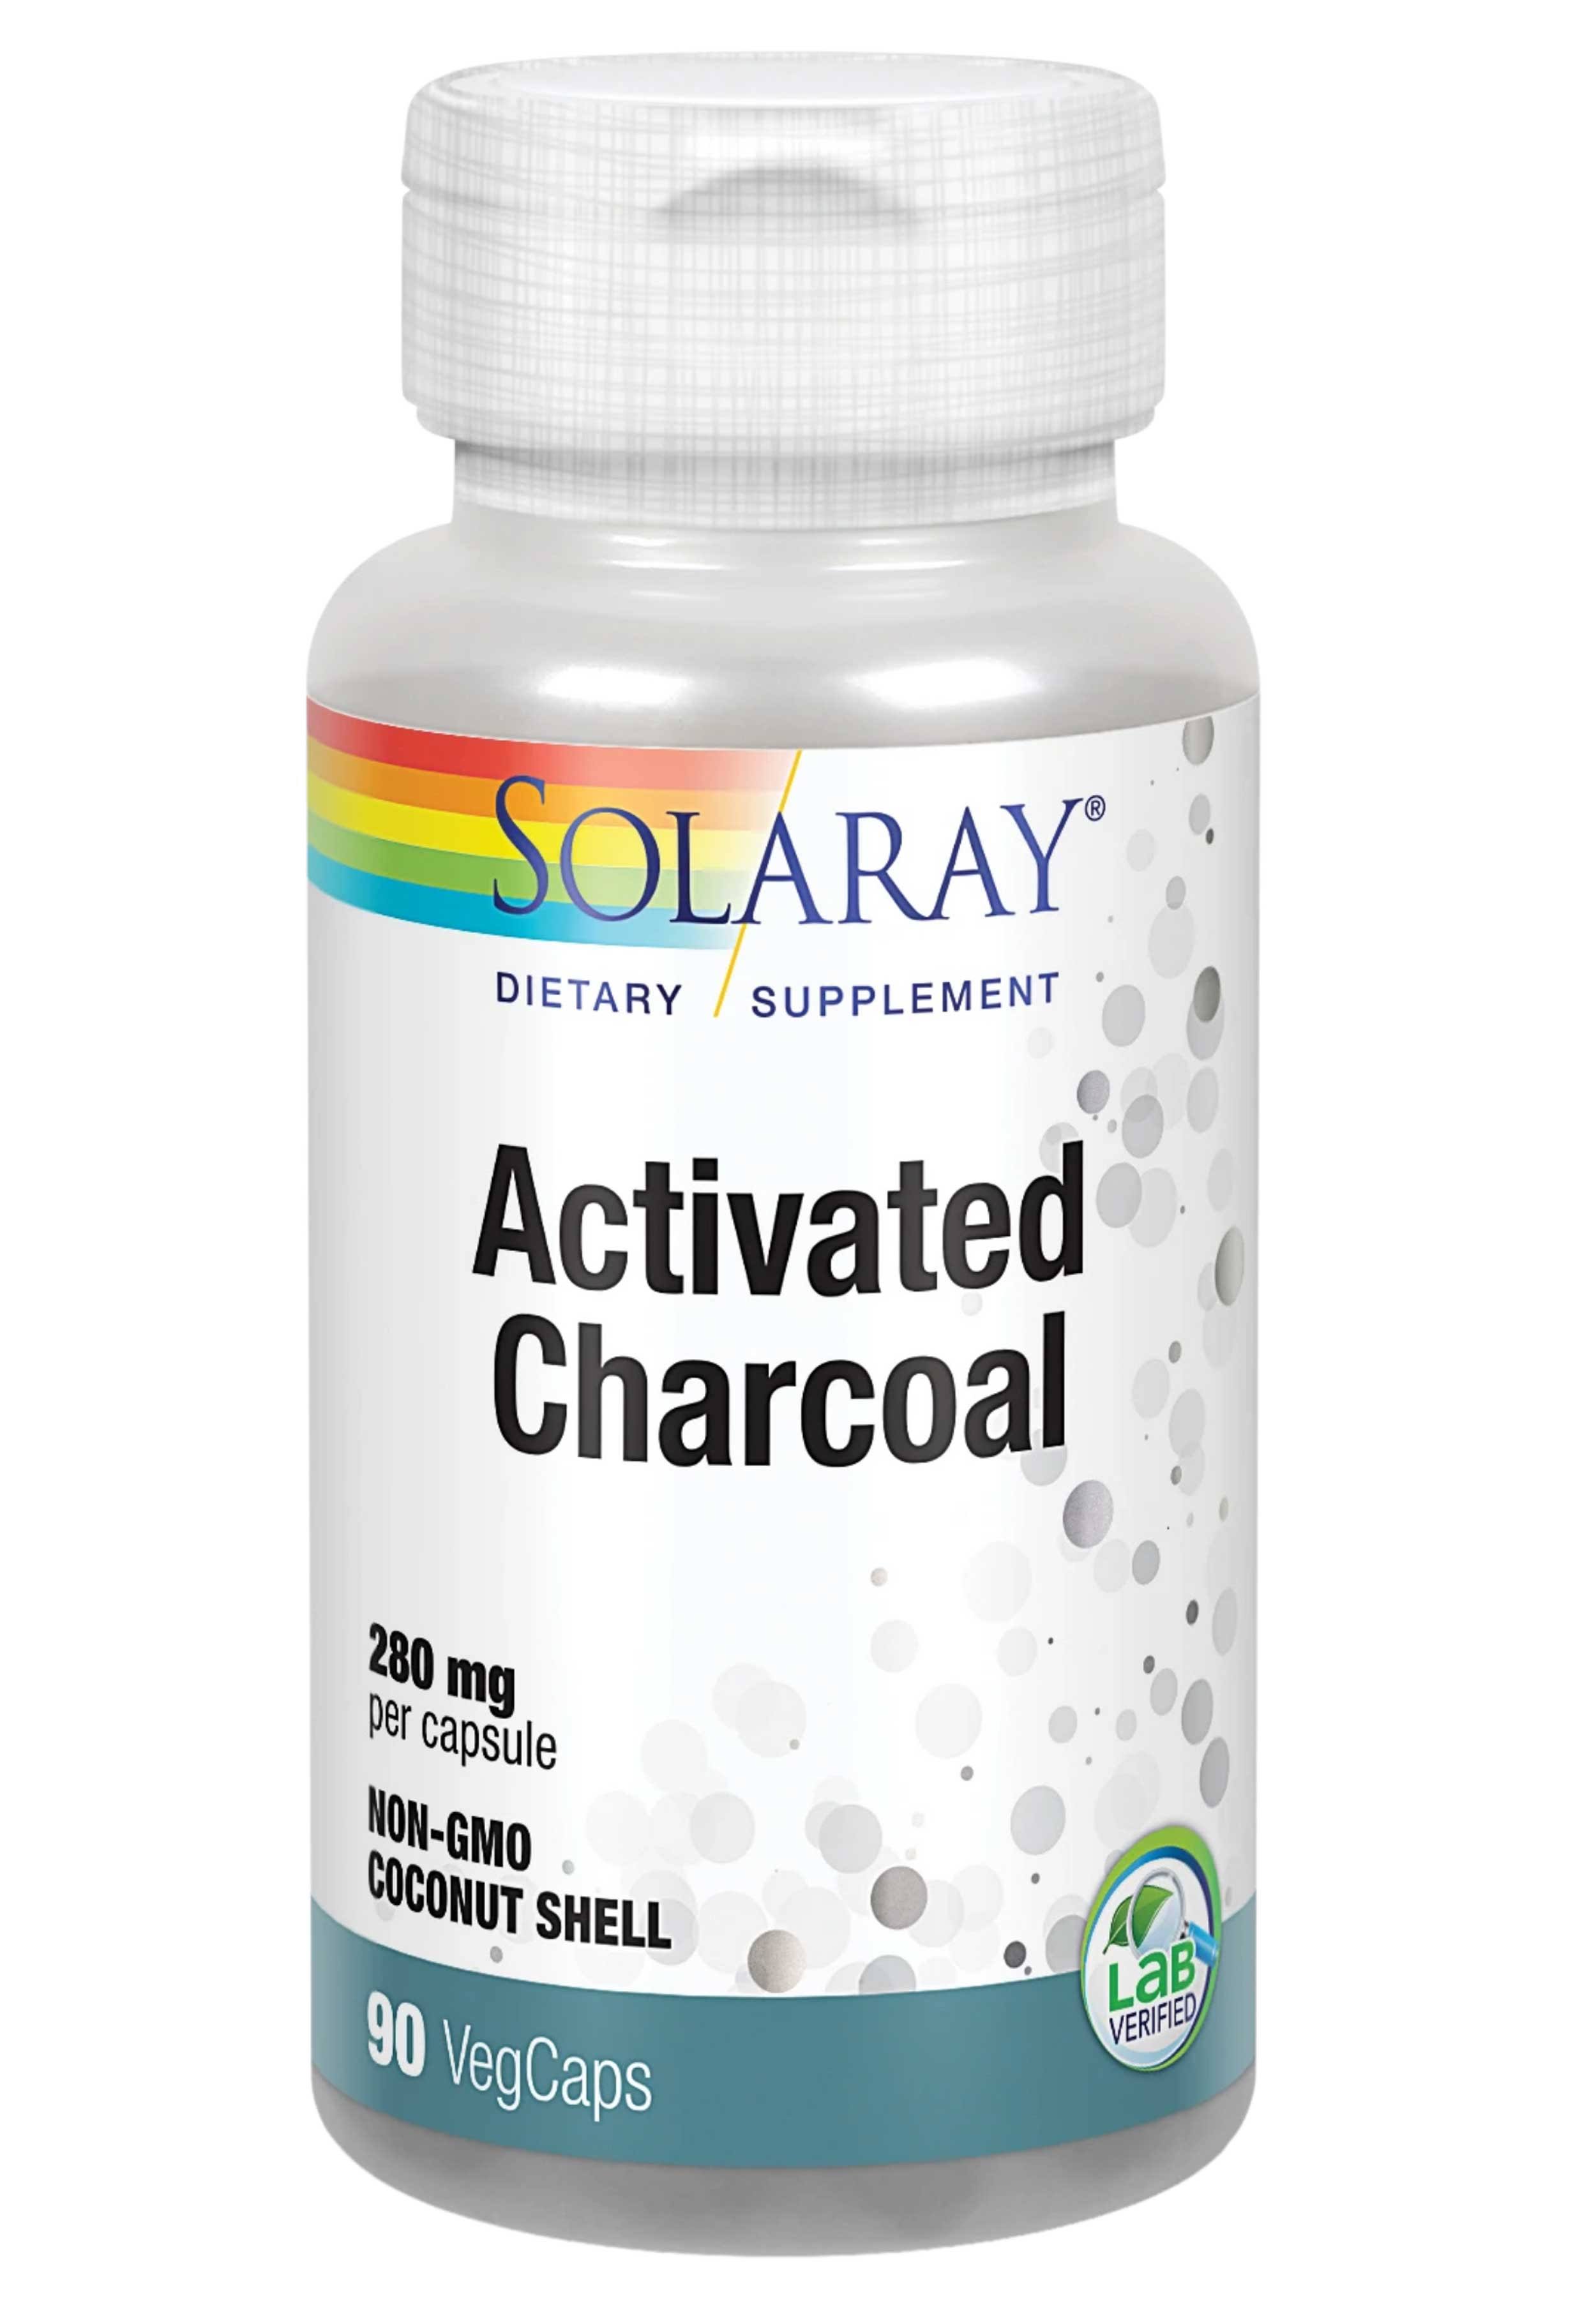 Solaray Activated Charcoal - 280mg, 90 Capsules